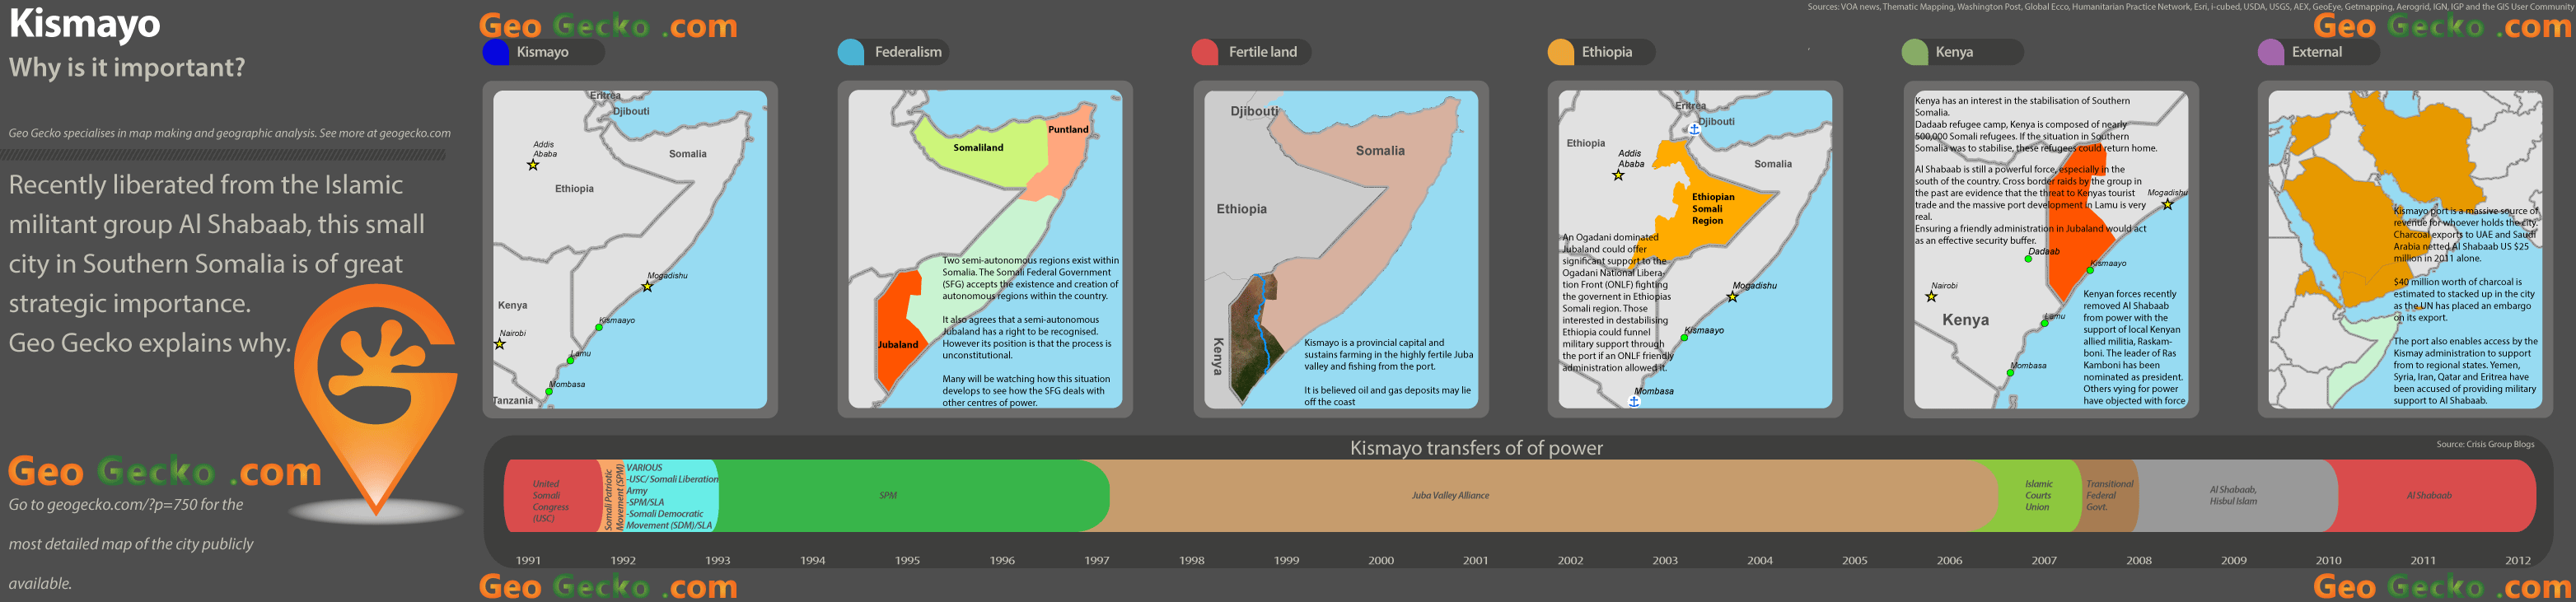 Why Kismayo is important Infographic